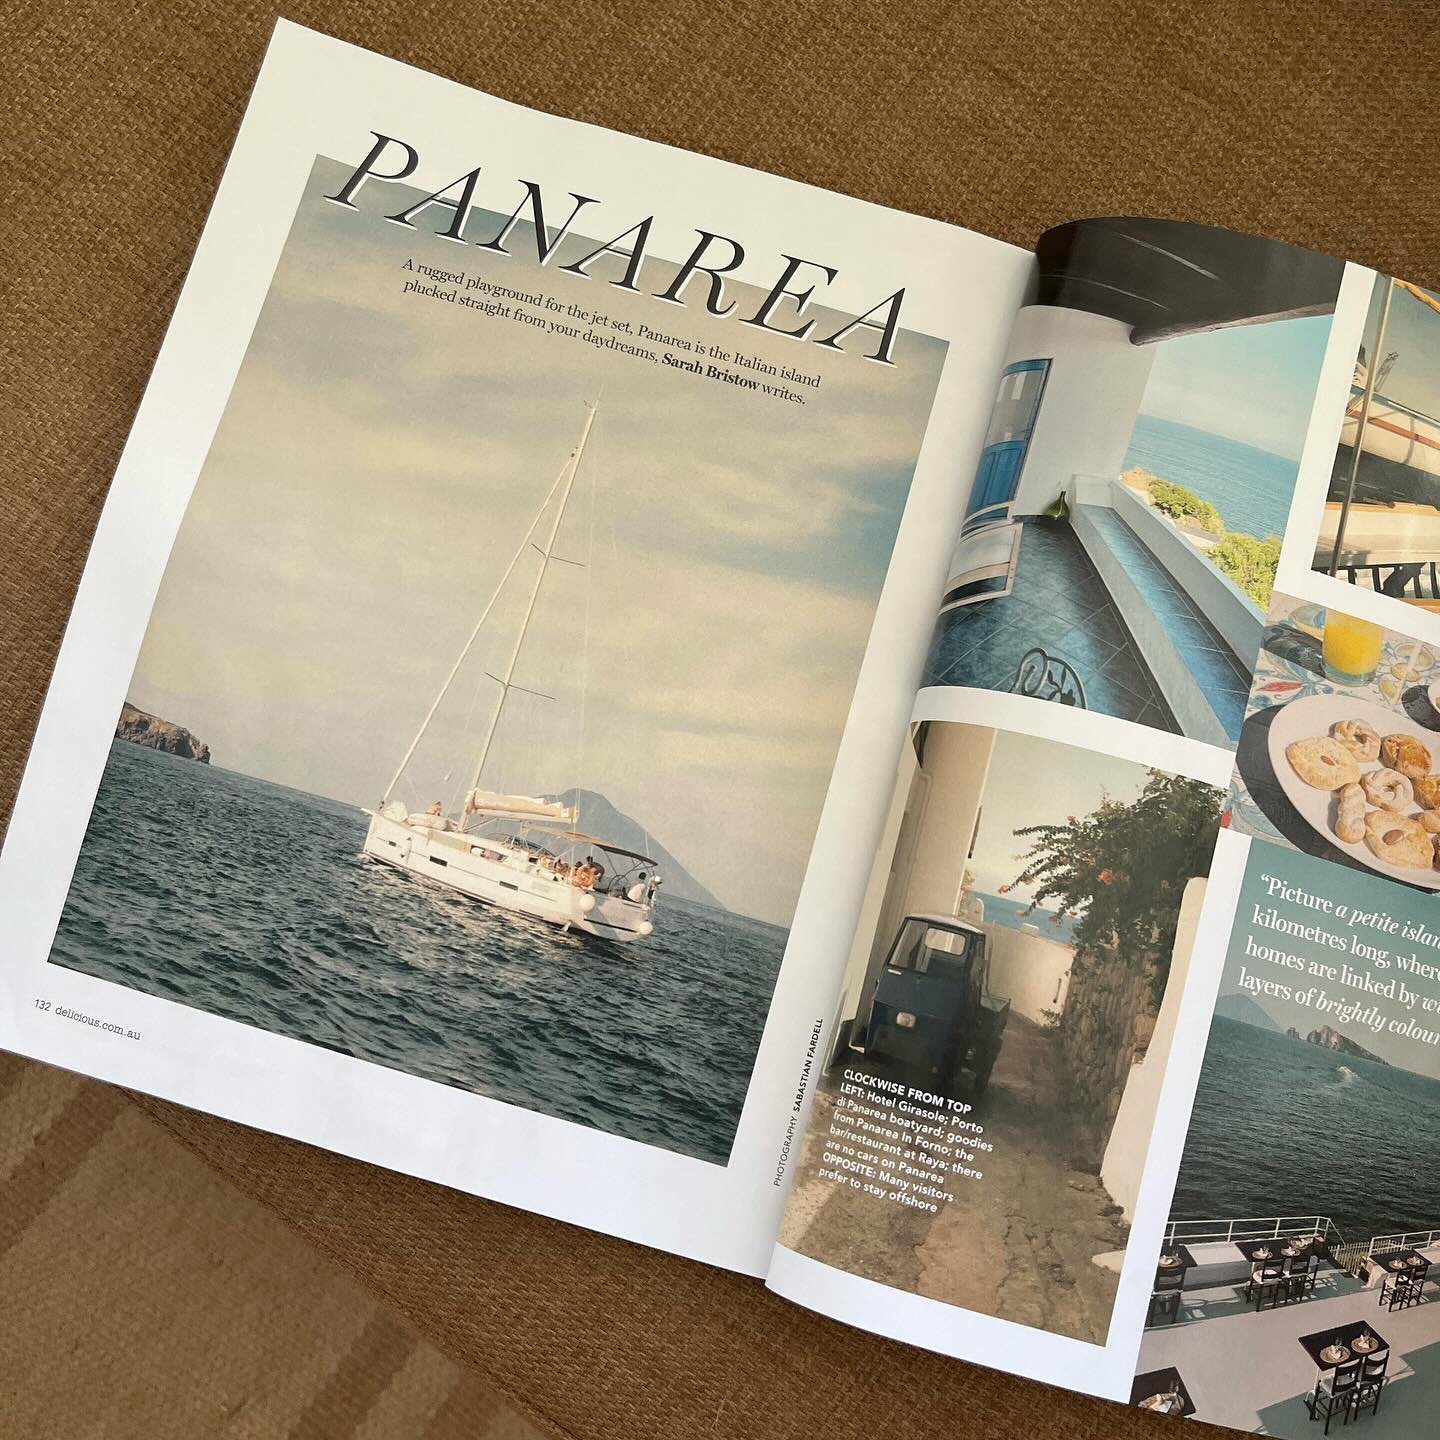 Last year I dropped by dreamy Panarea. Find my ode to the small but mighty island in the @deliciousaus March issue. Thanks to @sabastianfardell for the glorious photos &amp; @constantinademos for letting me rant on.